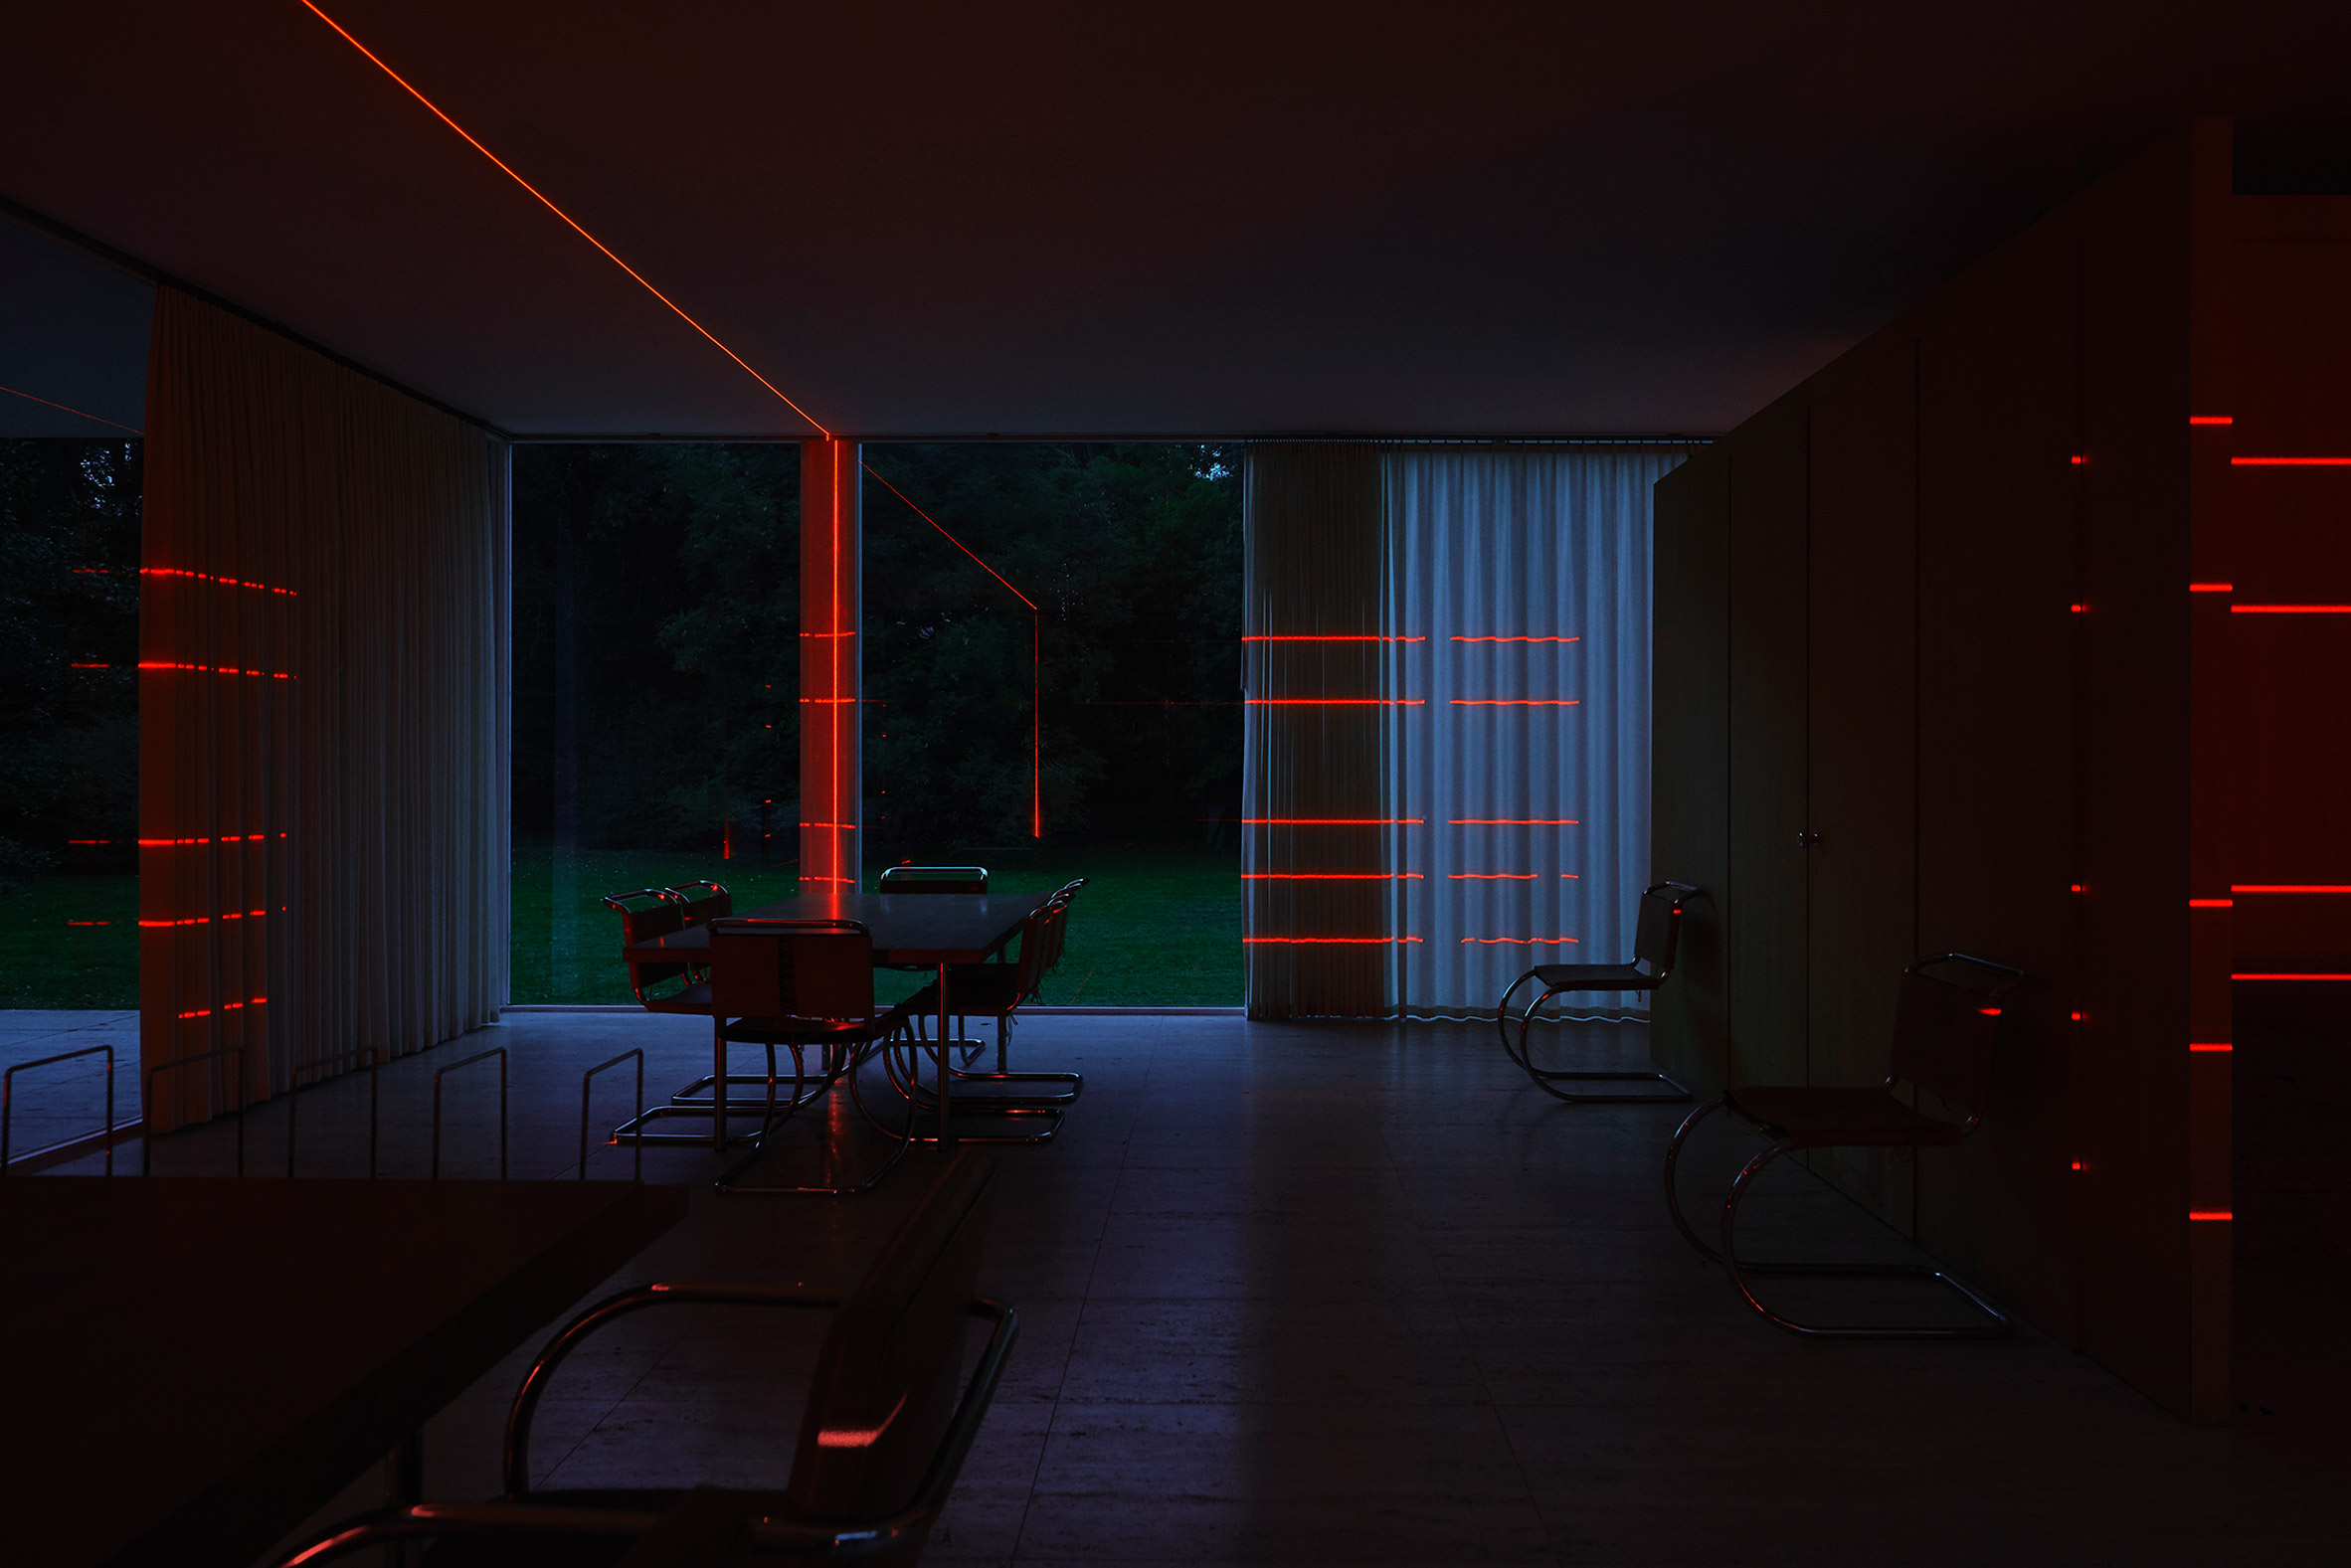 Geometry of Light at Mies van der Rohe's Farnsworth House by Iker Gil and Luftwerk